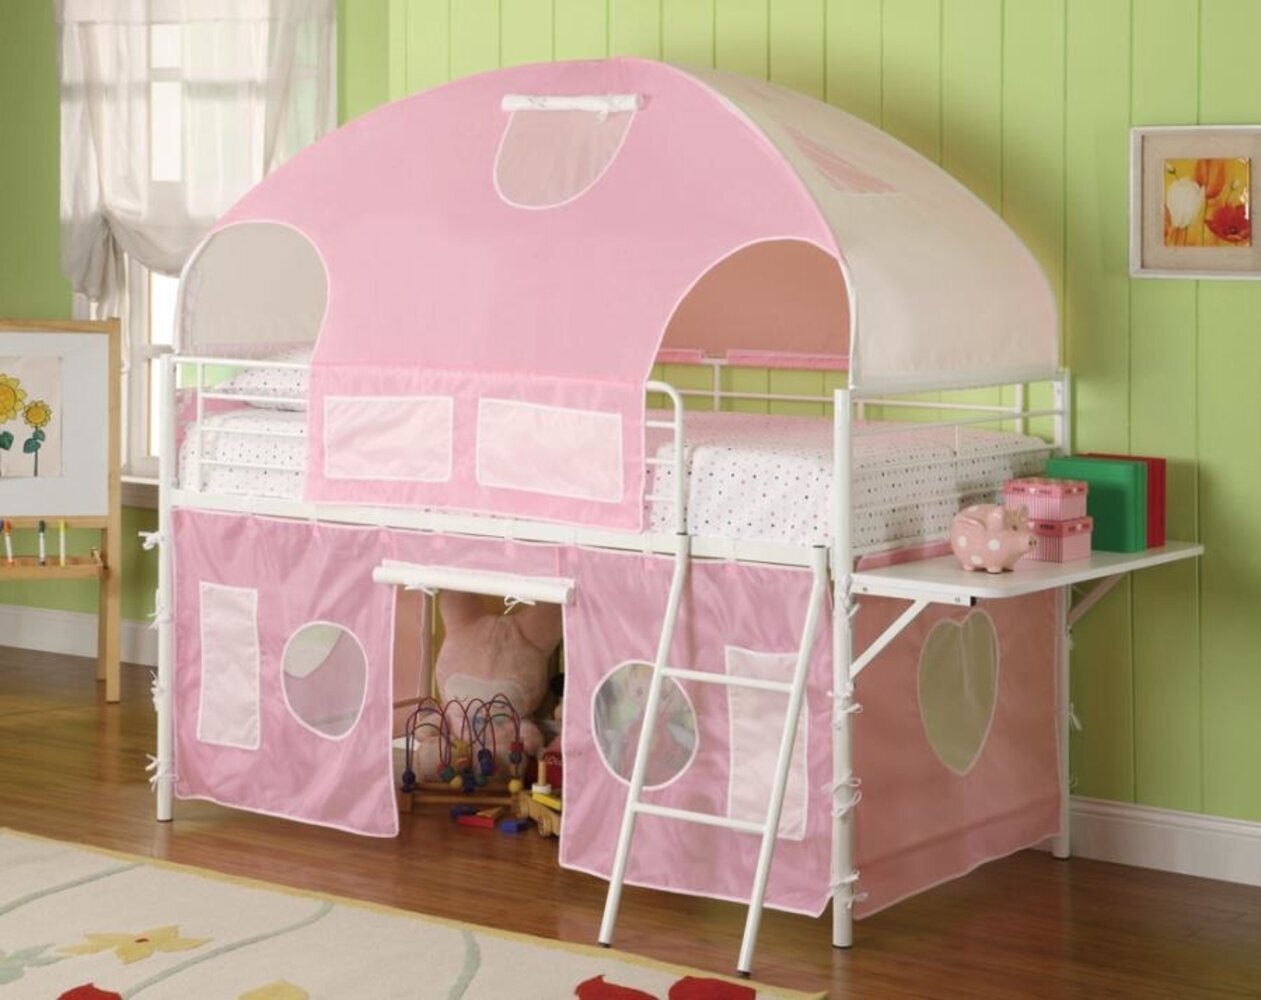 Top bunk bed tent that’s pink, pretty, and beautiful 